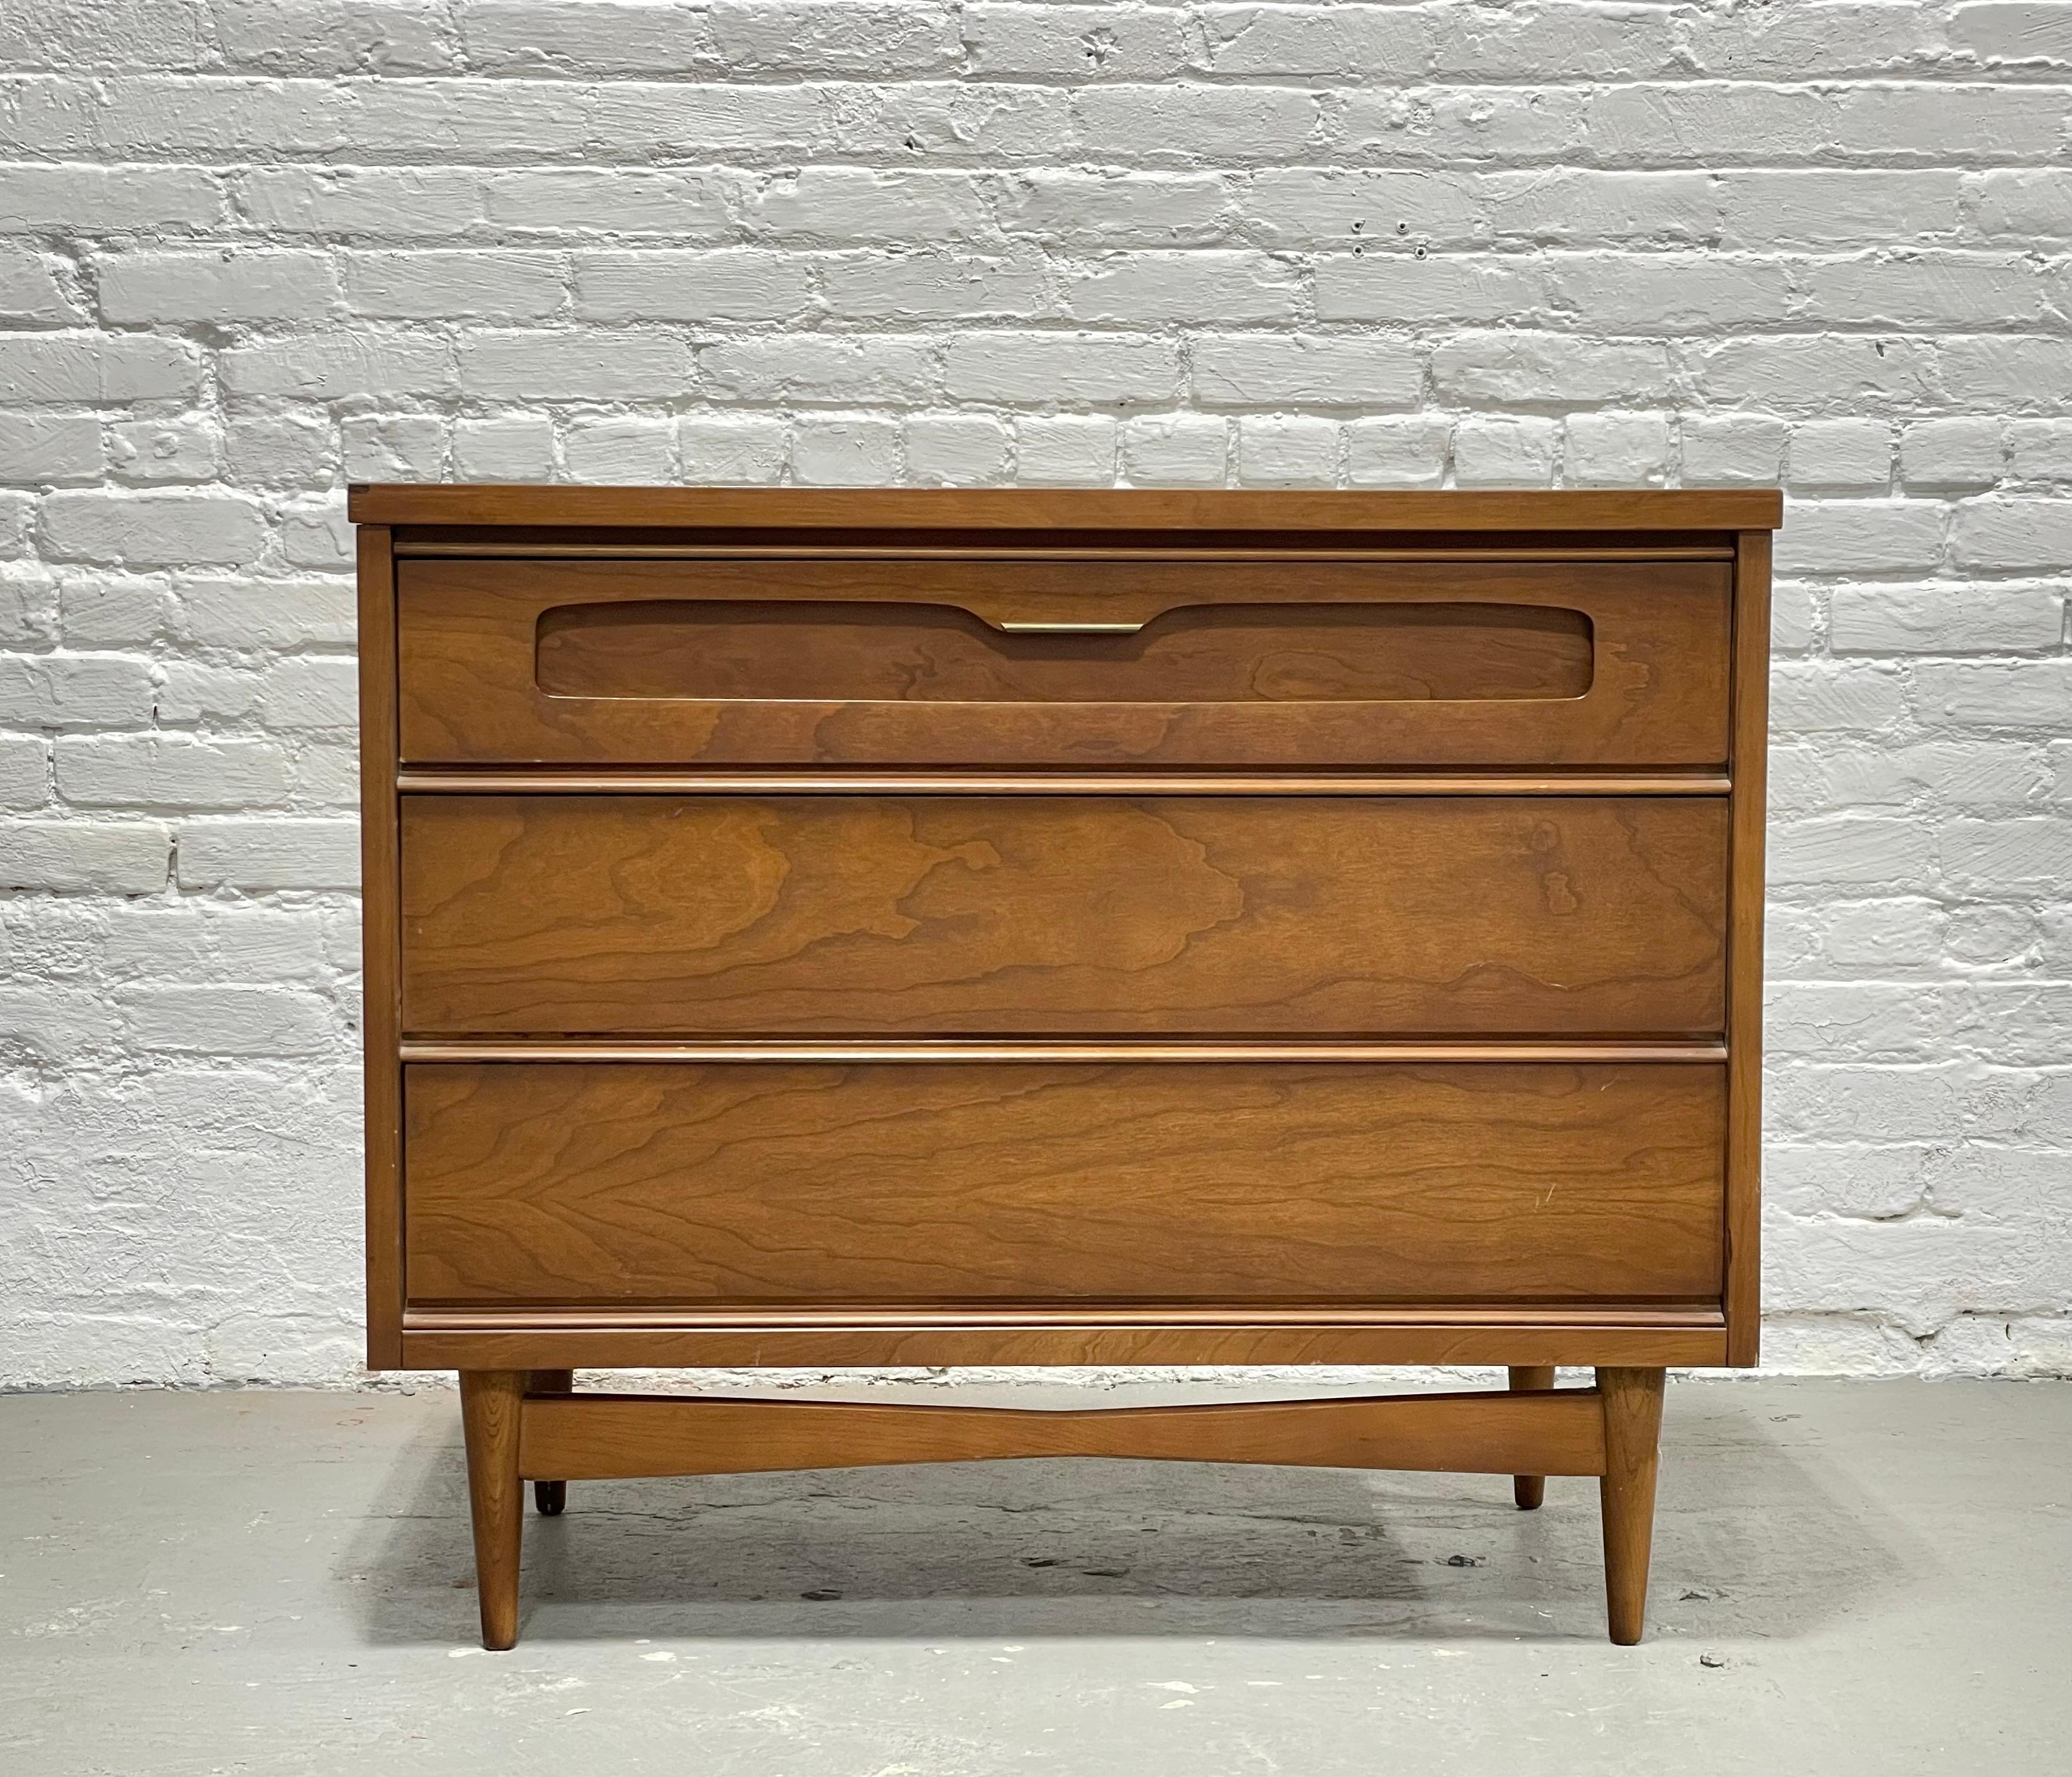 Mid Century Modern Petite Dresser by Bassett Furniture Co., c. 1960's. This thoughtful piece takes up minimal floor space yet provides three deep and spacious drawers for storage. Place in your entryway as a landing place for mail and keys or a